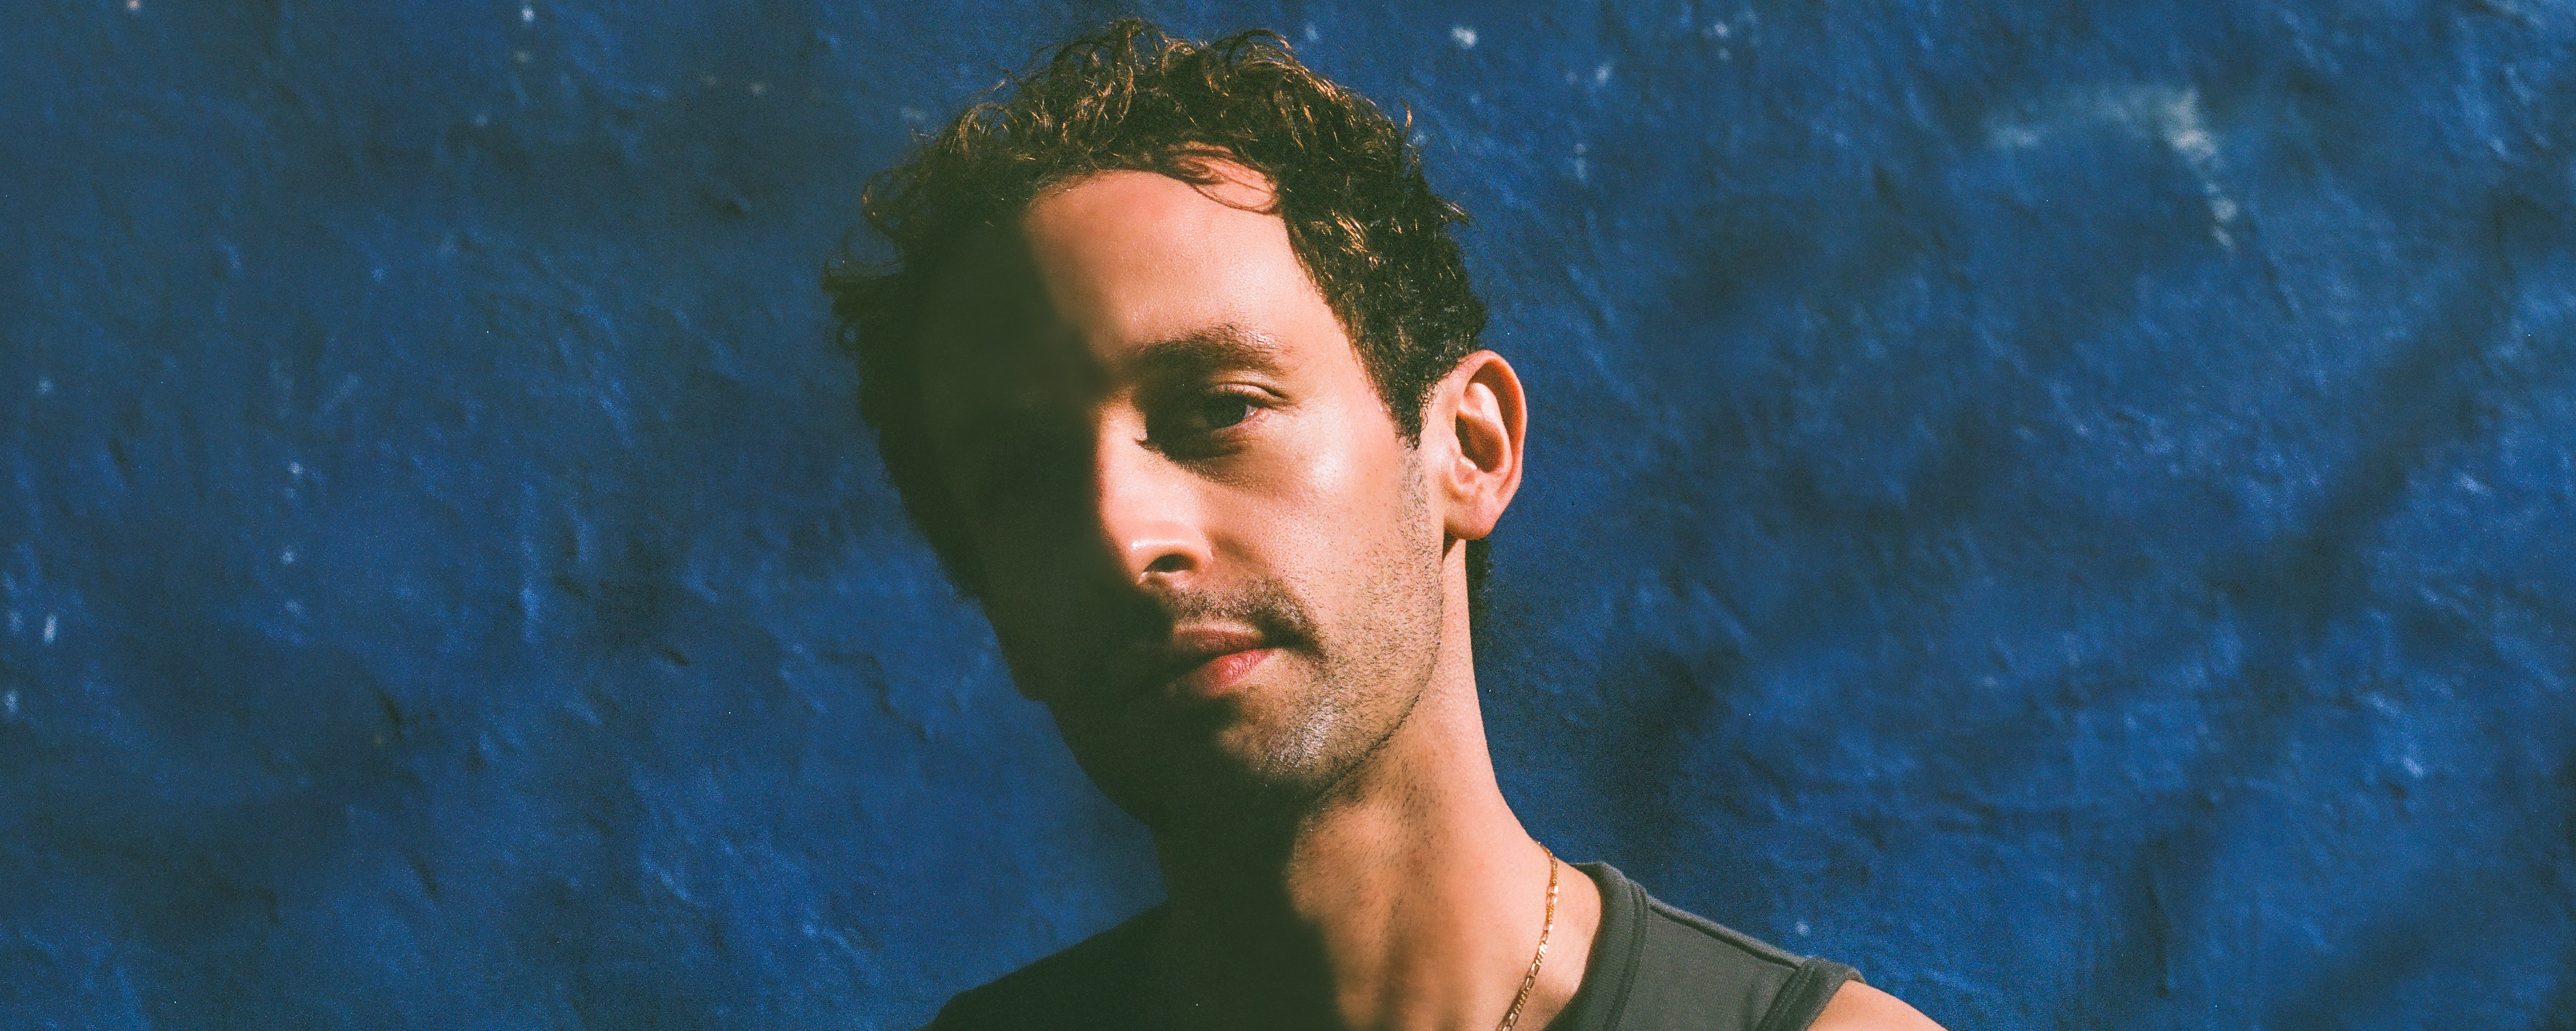 After a Lifetime of Collecting Songs, Wrabel Makes His Triumphant Full-Length Debut